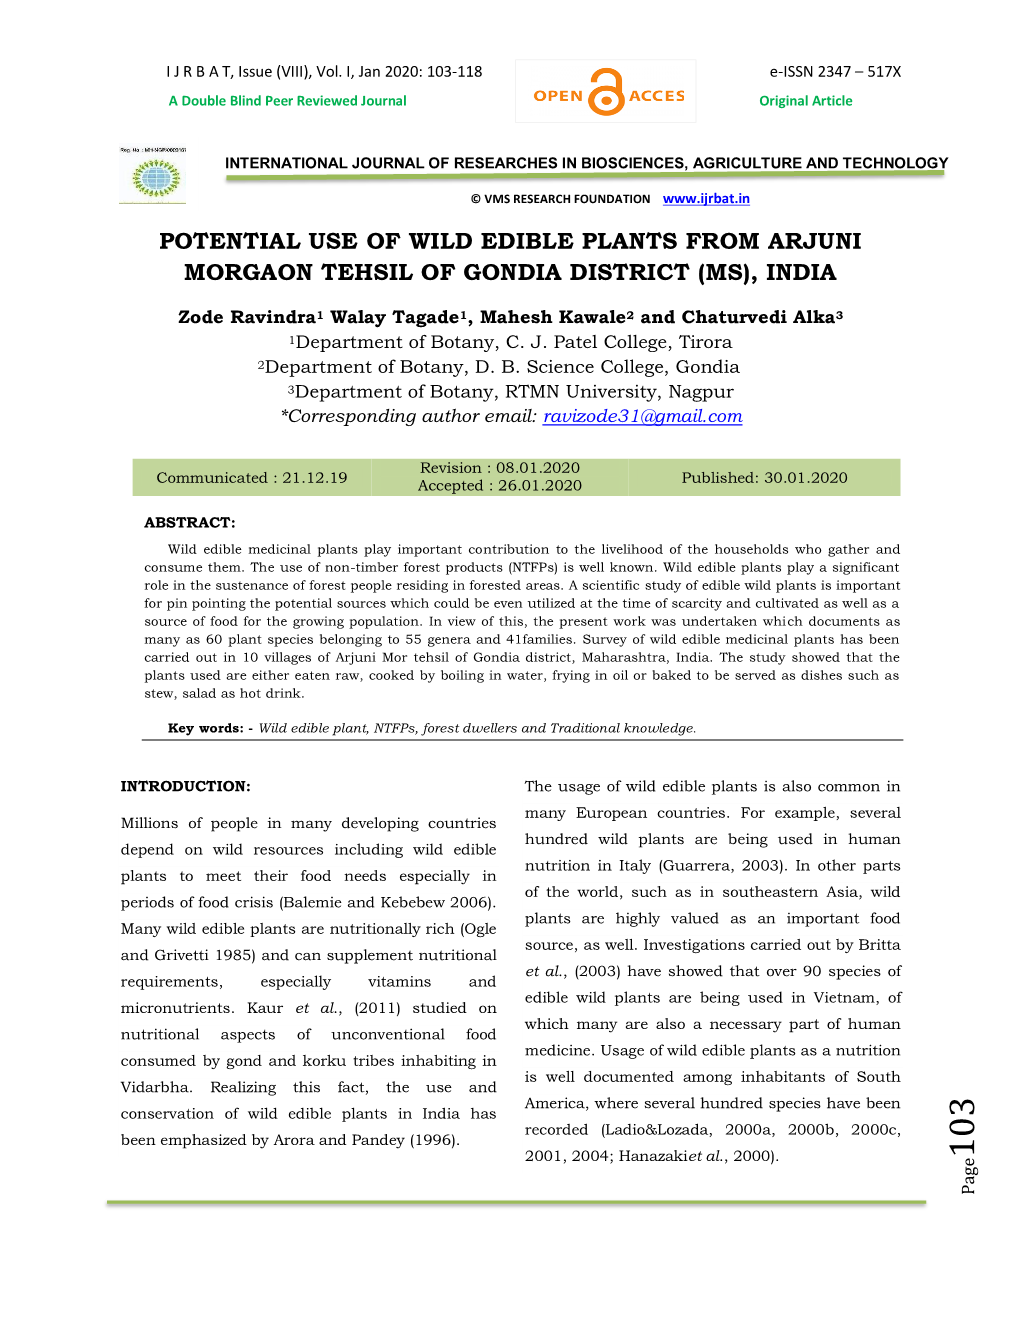 Potential Use of Wild Edible Plants from Arjuni Morgaon Tehsil of Gondia District (Ms), India